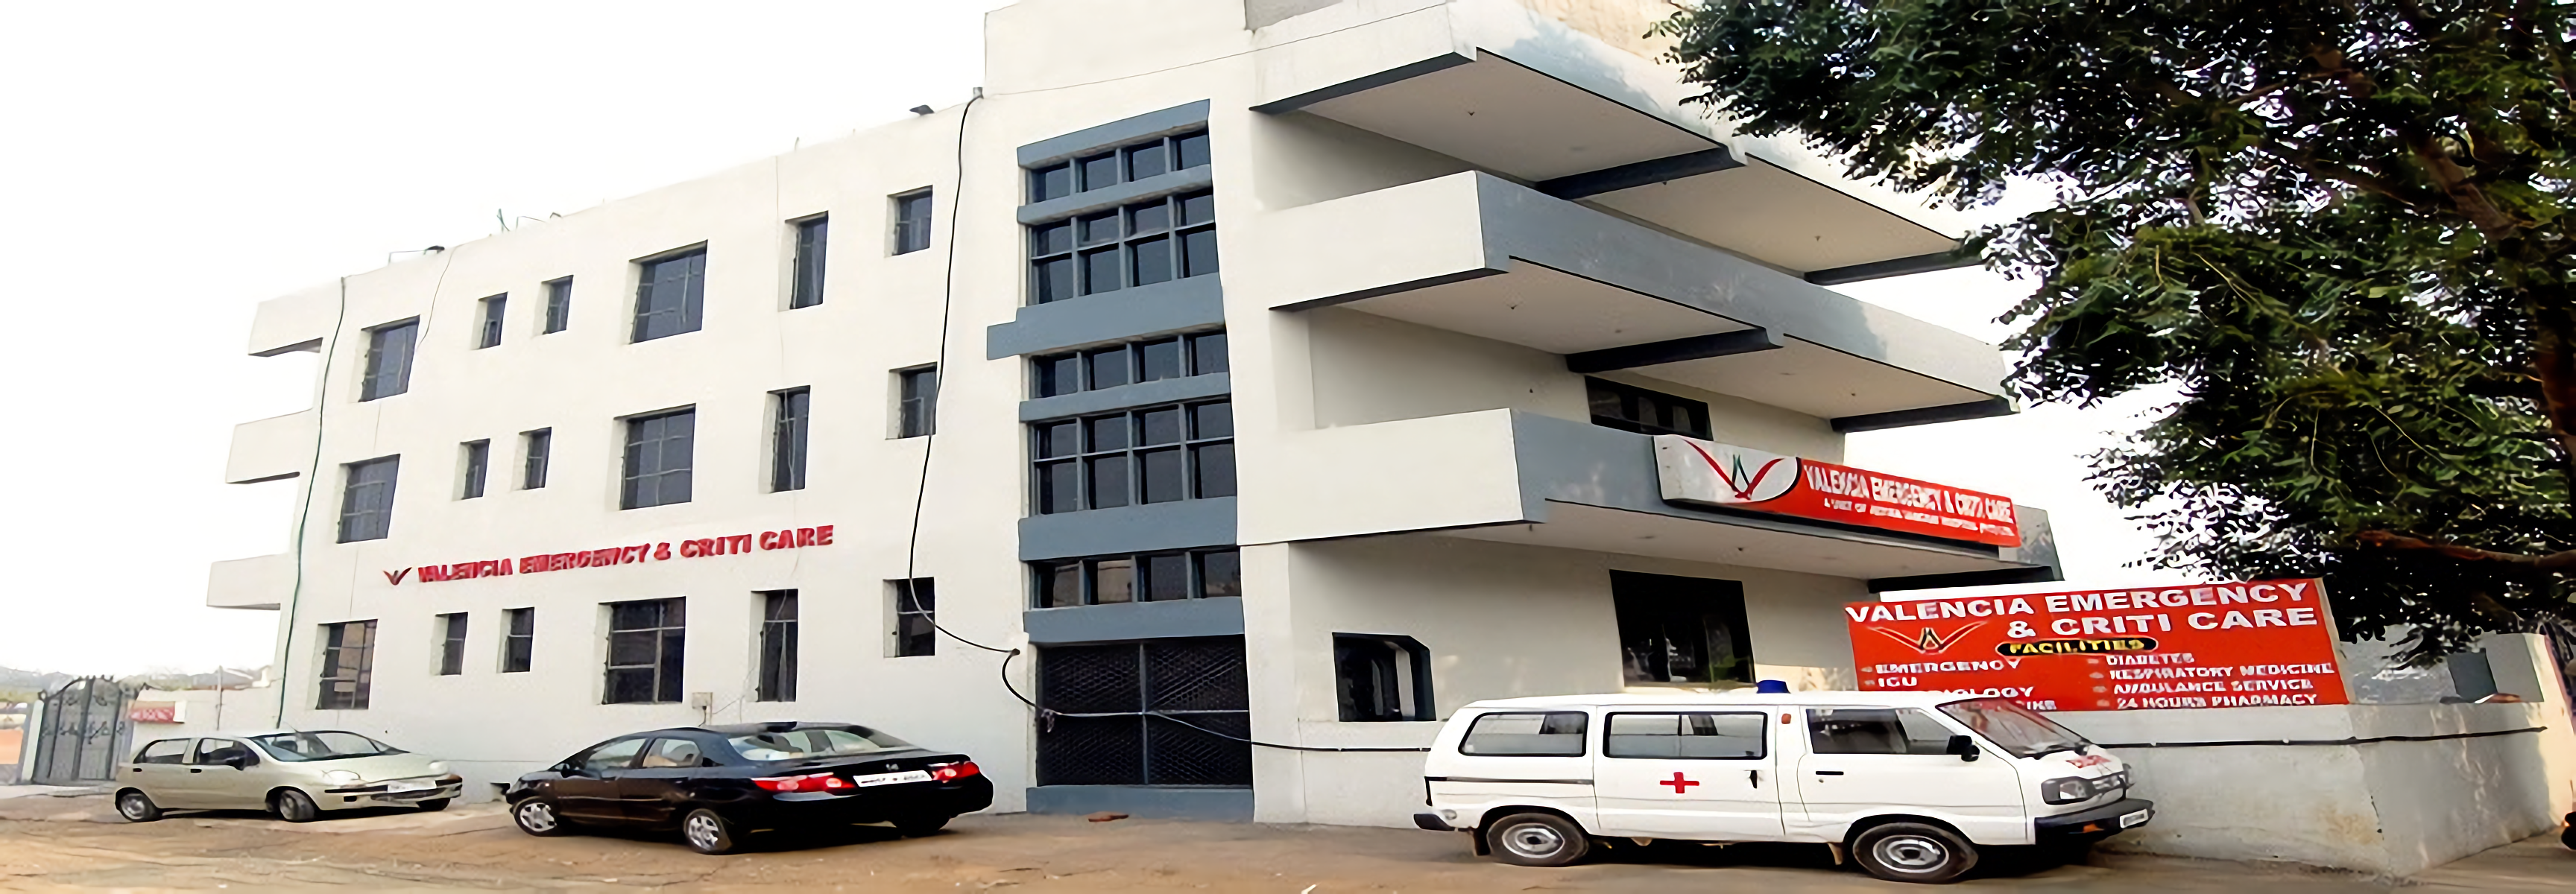 Valencia Emergency And Critical Care Faridabad New Industrial Township